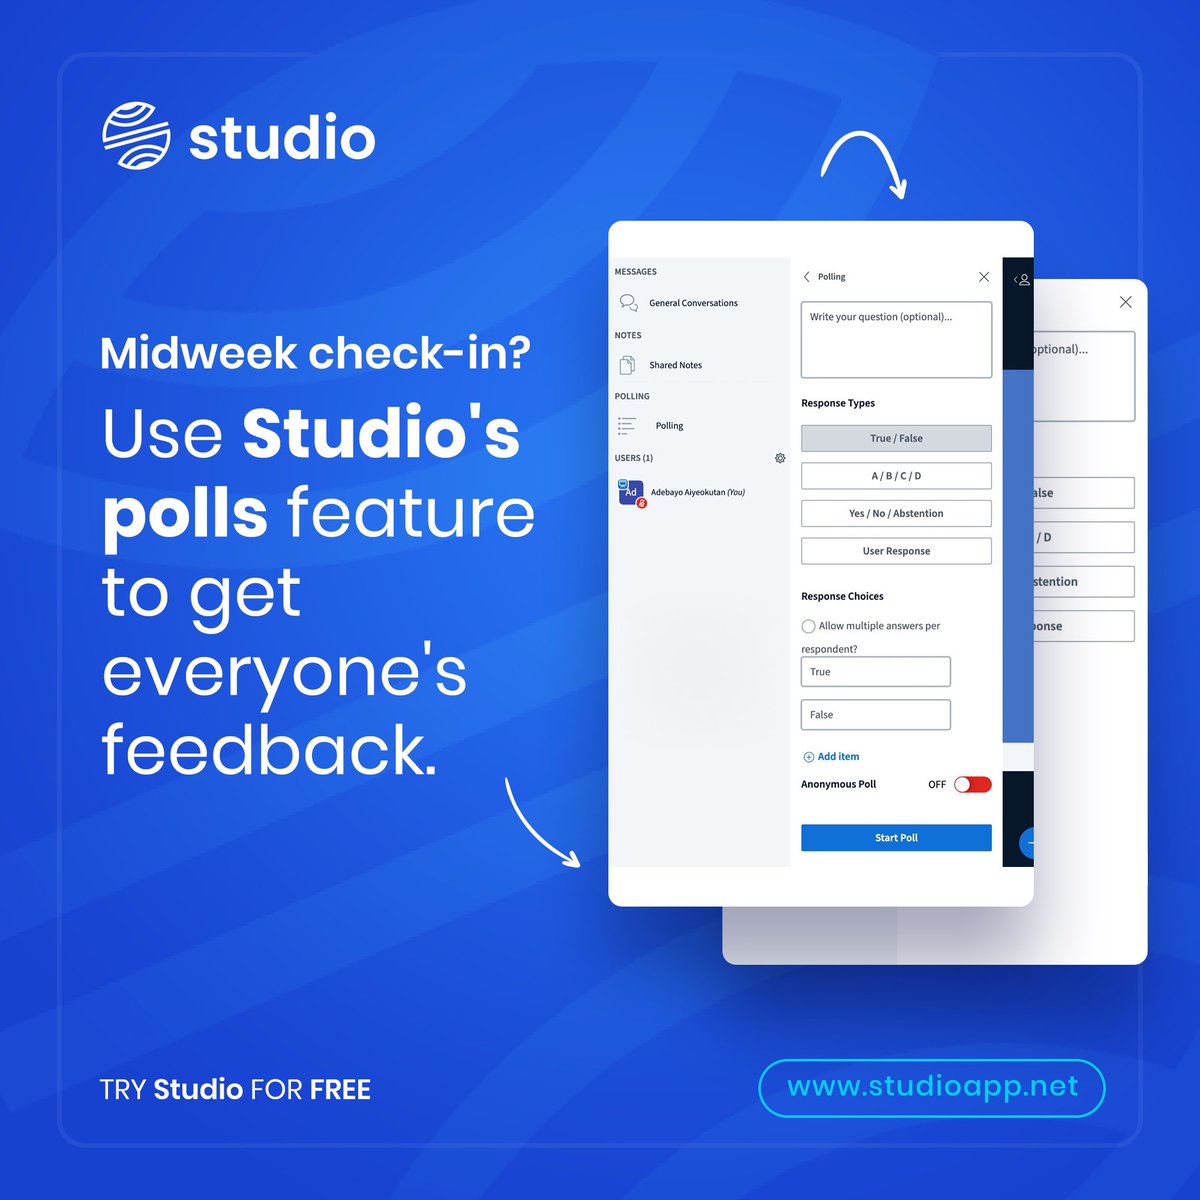 Don’t just guess! Get real-time insights with Studio polls during your midweek check-in. 

Stay connected, informed, and productive as a team.

#virtualmeeting #onlinemeeting #effectivemeetings #teamwork #teammeeting #collaboration #remotework #studio